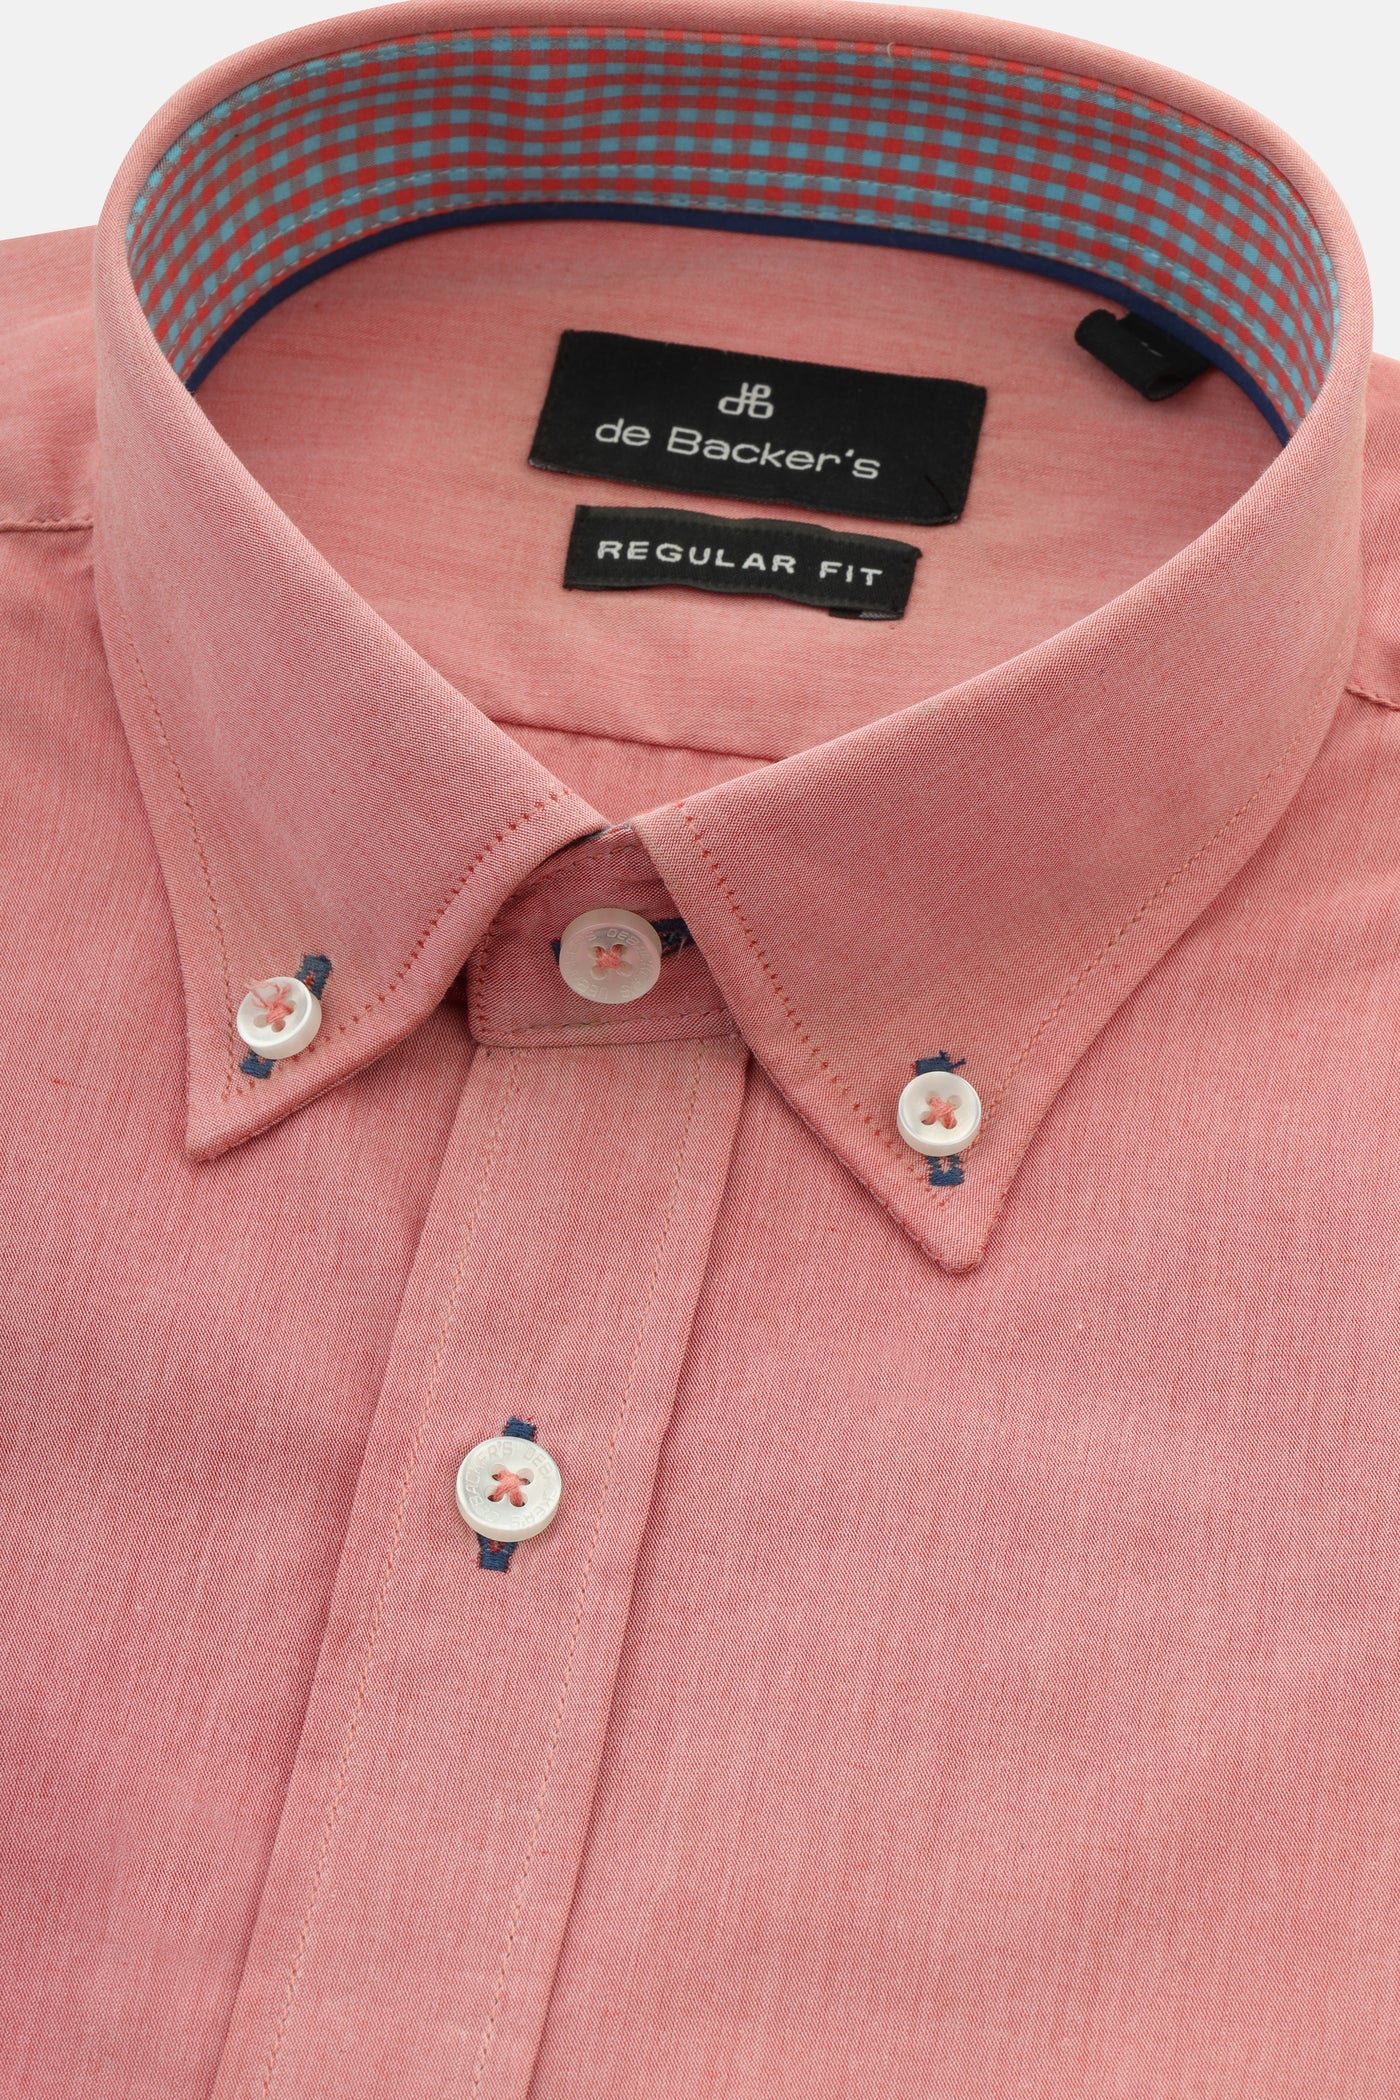 Solid Old Rose Cotton Smart Casual Shirt